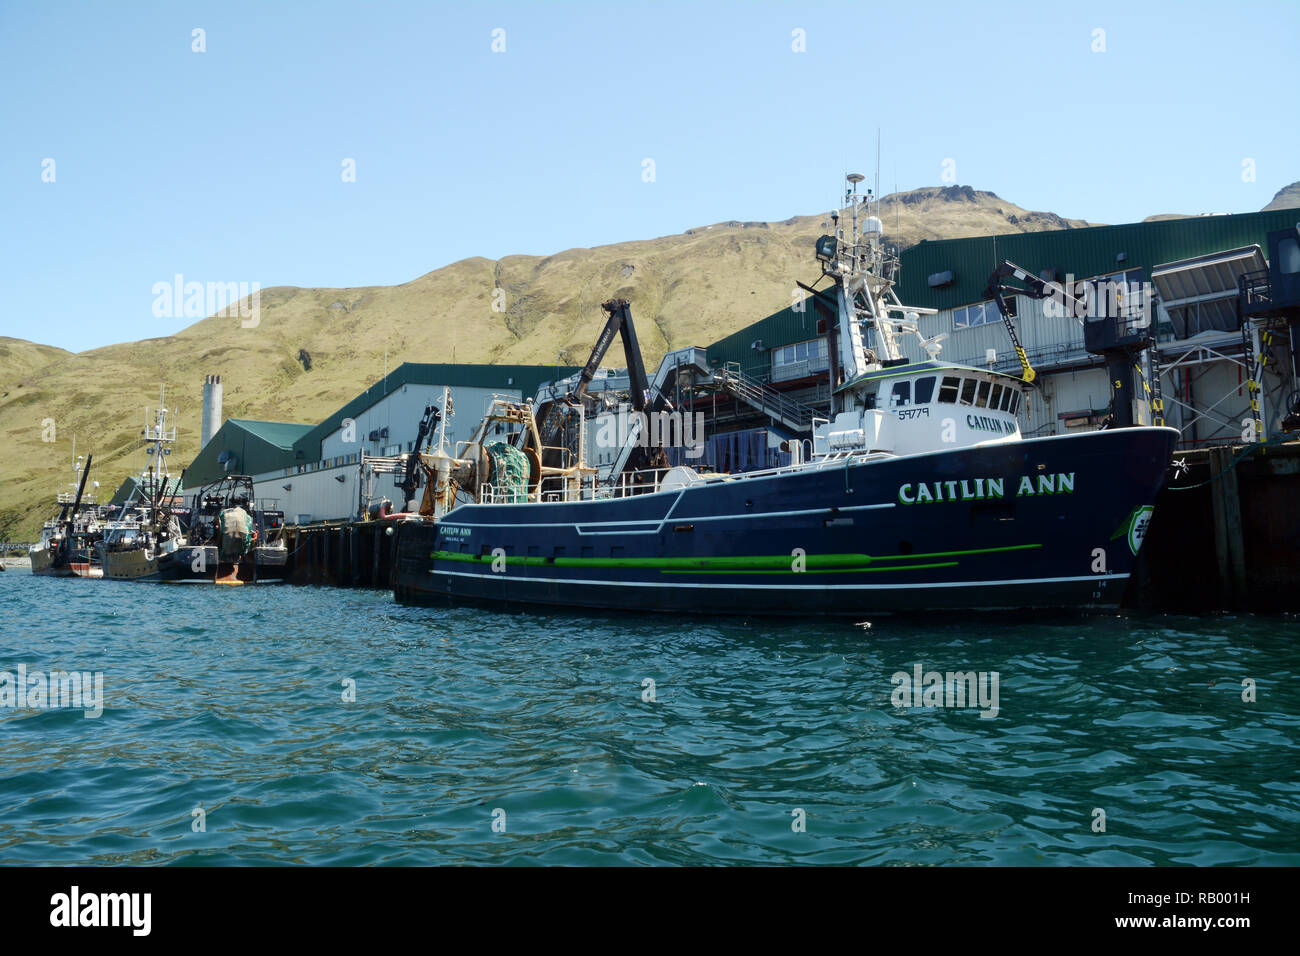 A commercial fishing boat unloads its cargo of fresh fish at a seafood processing plant in Dutch Harbor, Unalaska Island, Alaska, United States. Stock Photo